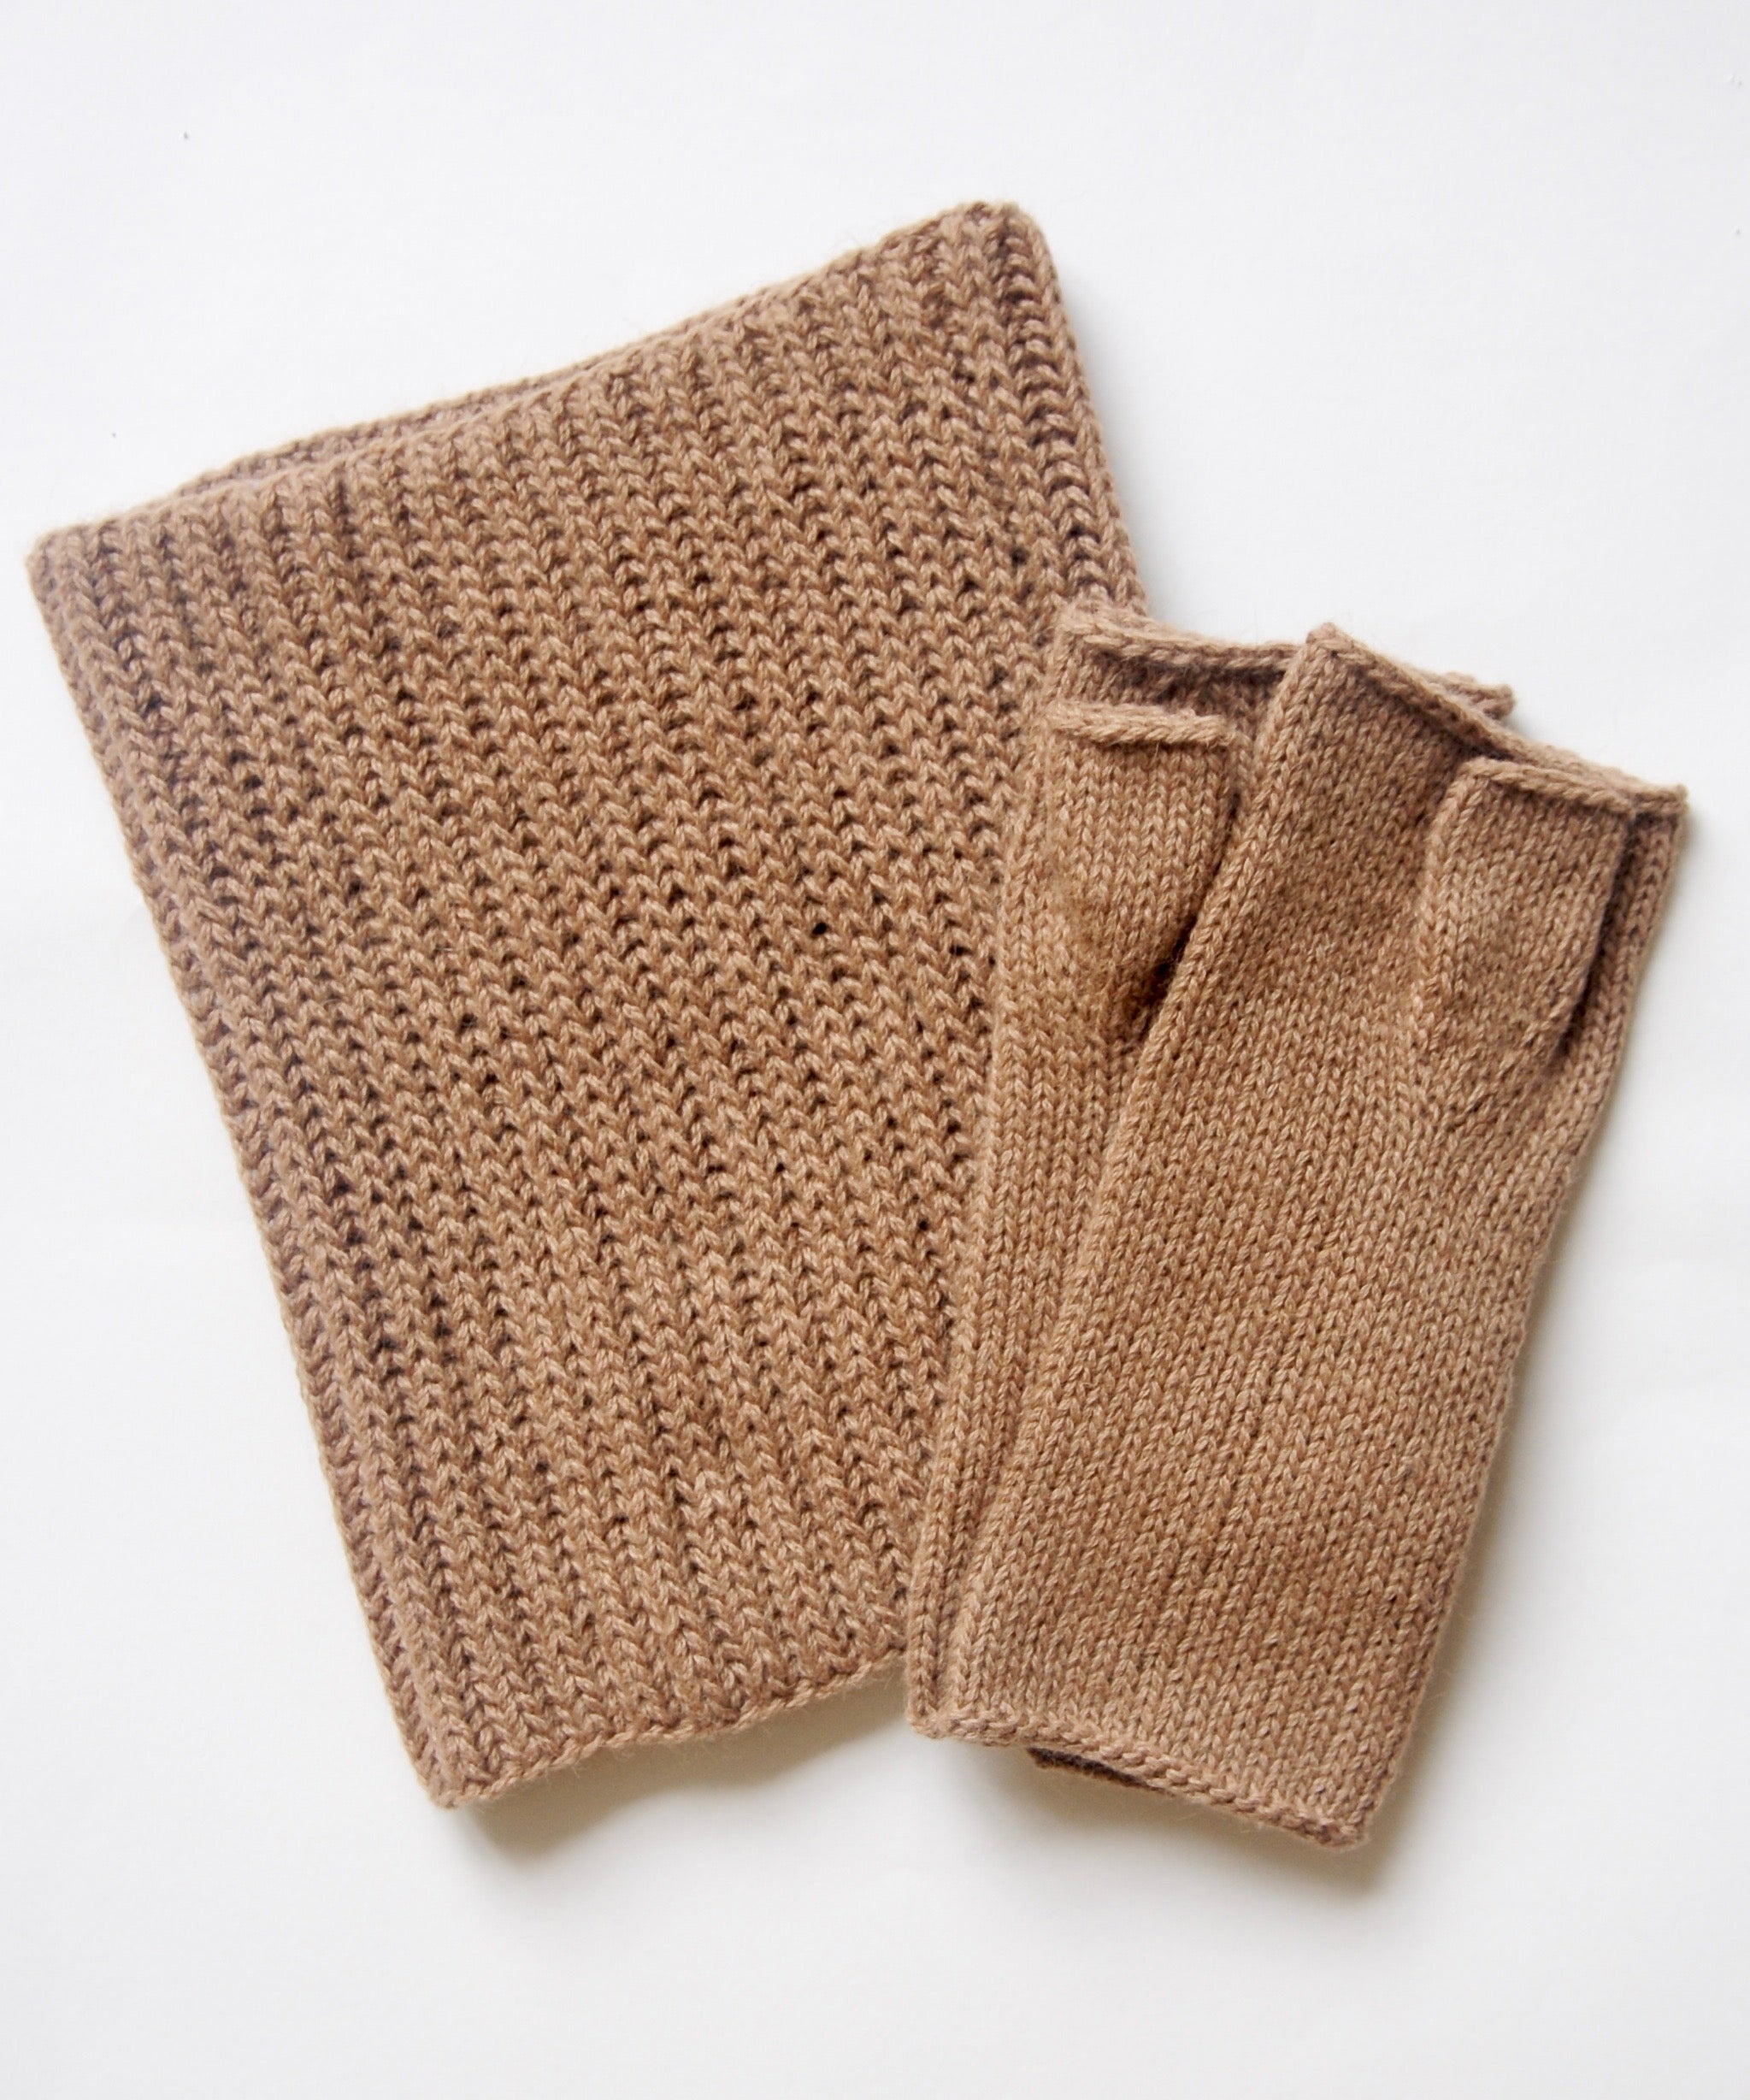 Camel-knitwear-made-in-the-uk-fishermans-scarf-fingerless-gloves